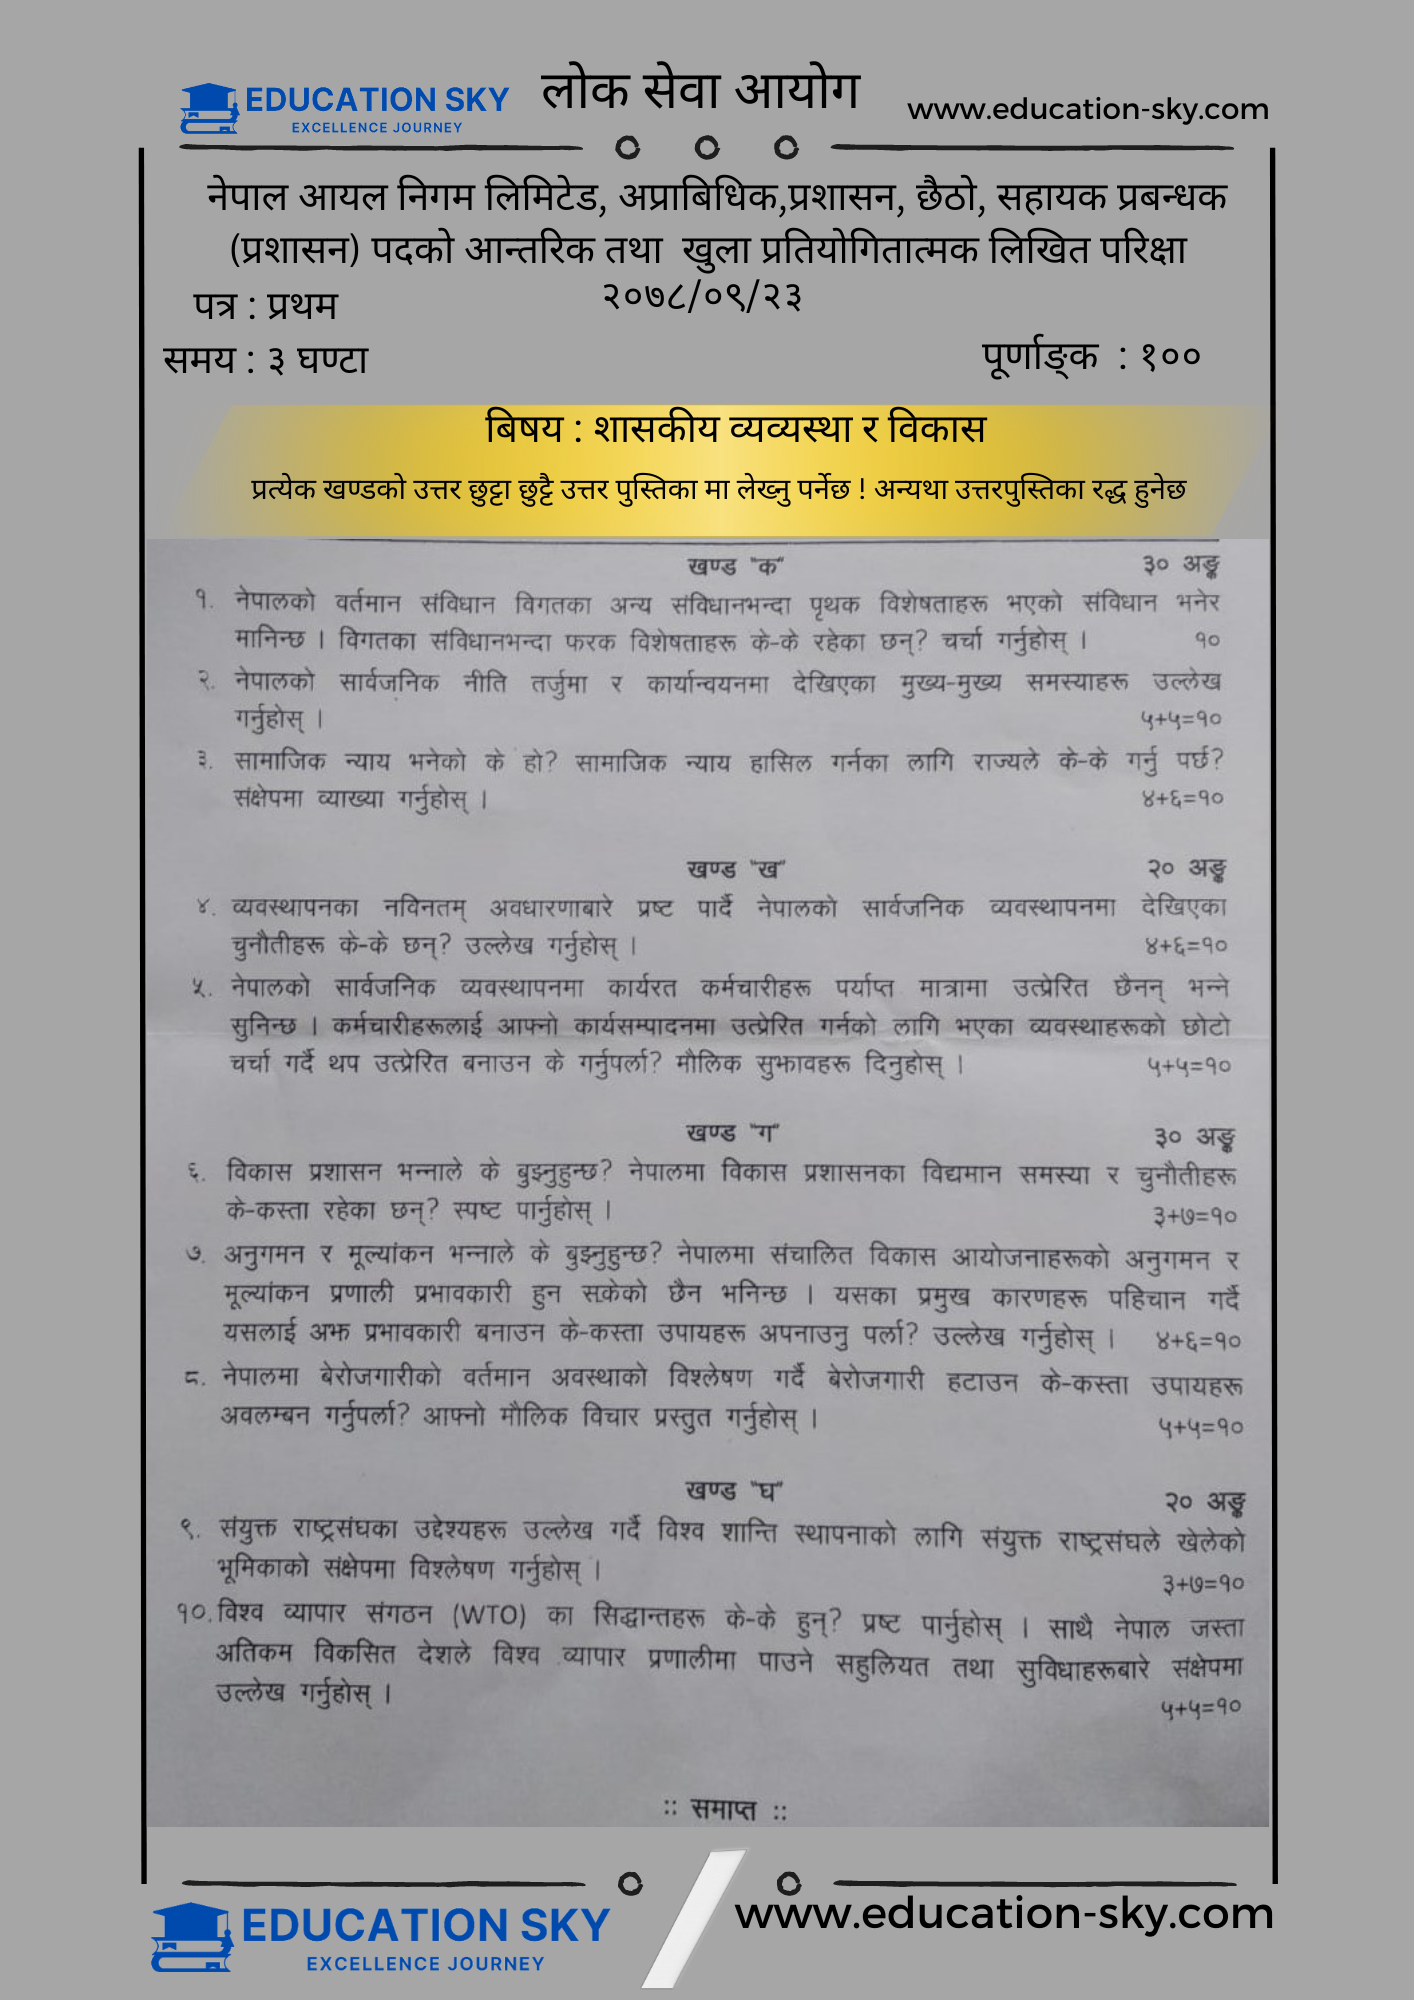 Nepal Oil Corporation Admin Officer Old Questions (2078-09-23)